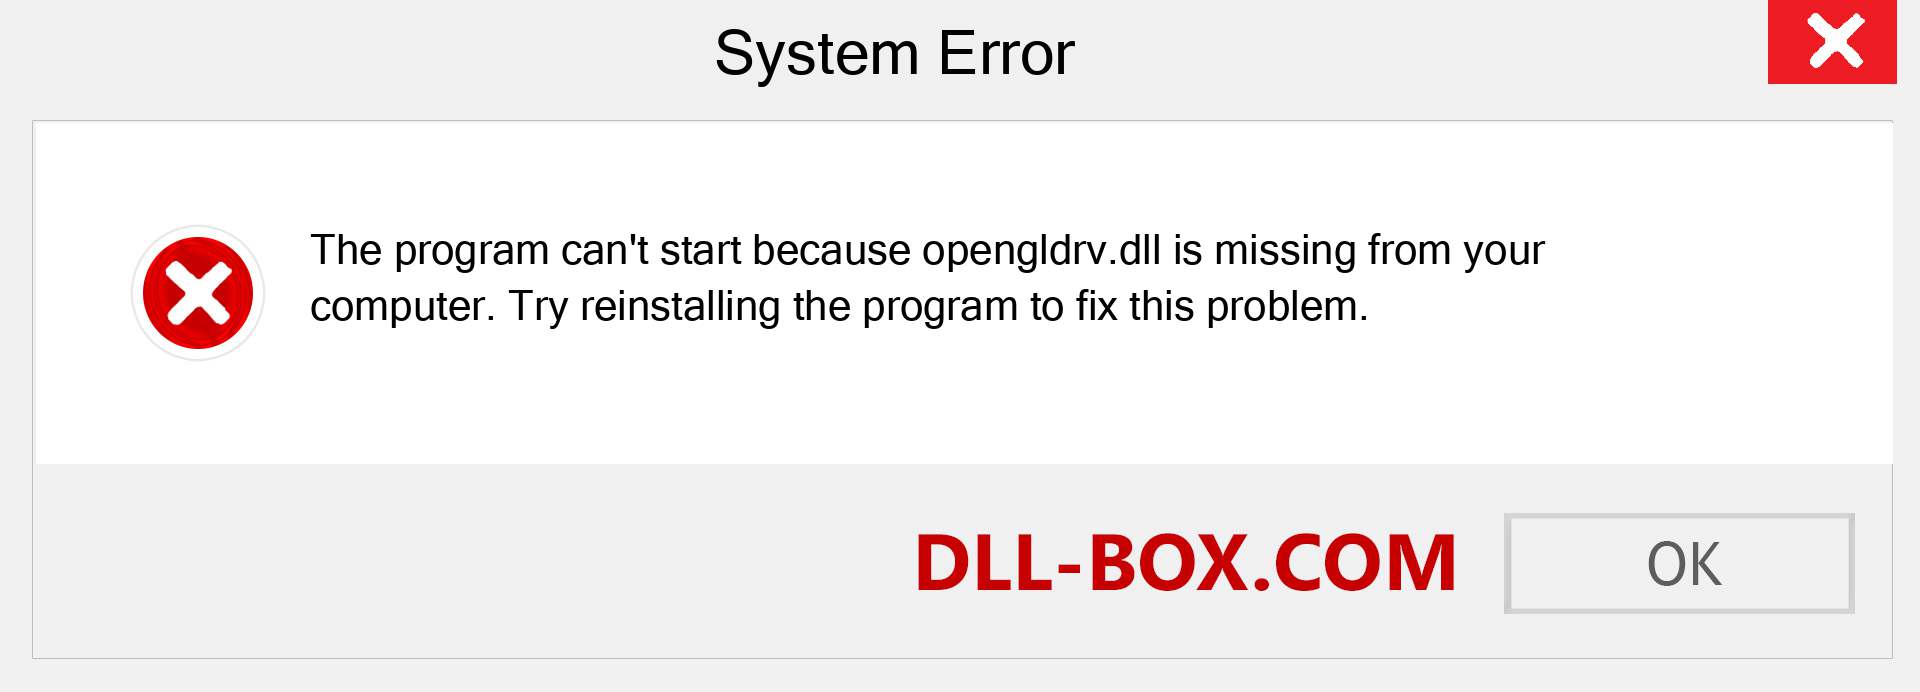  opengldrv.dll file is missing?. Download for Windows 7, 8, 10 - Fix  opengldrv dll Missing Error on Windows, photos, images